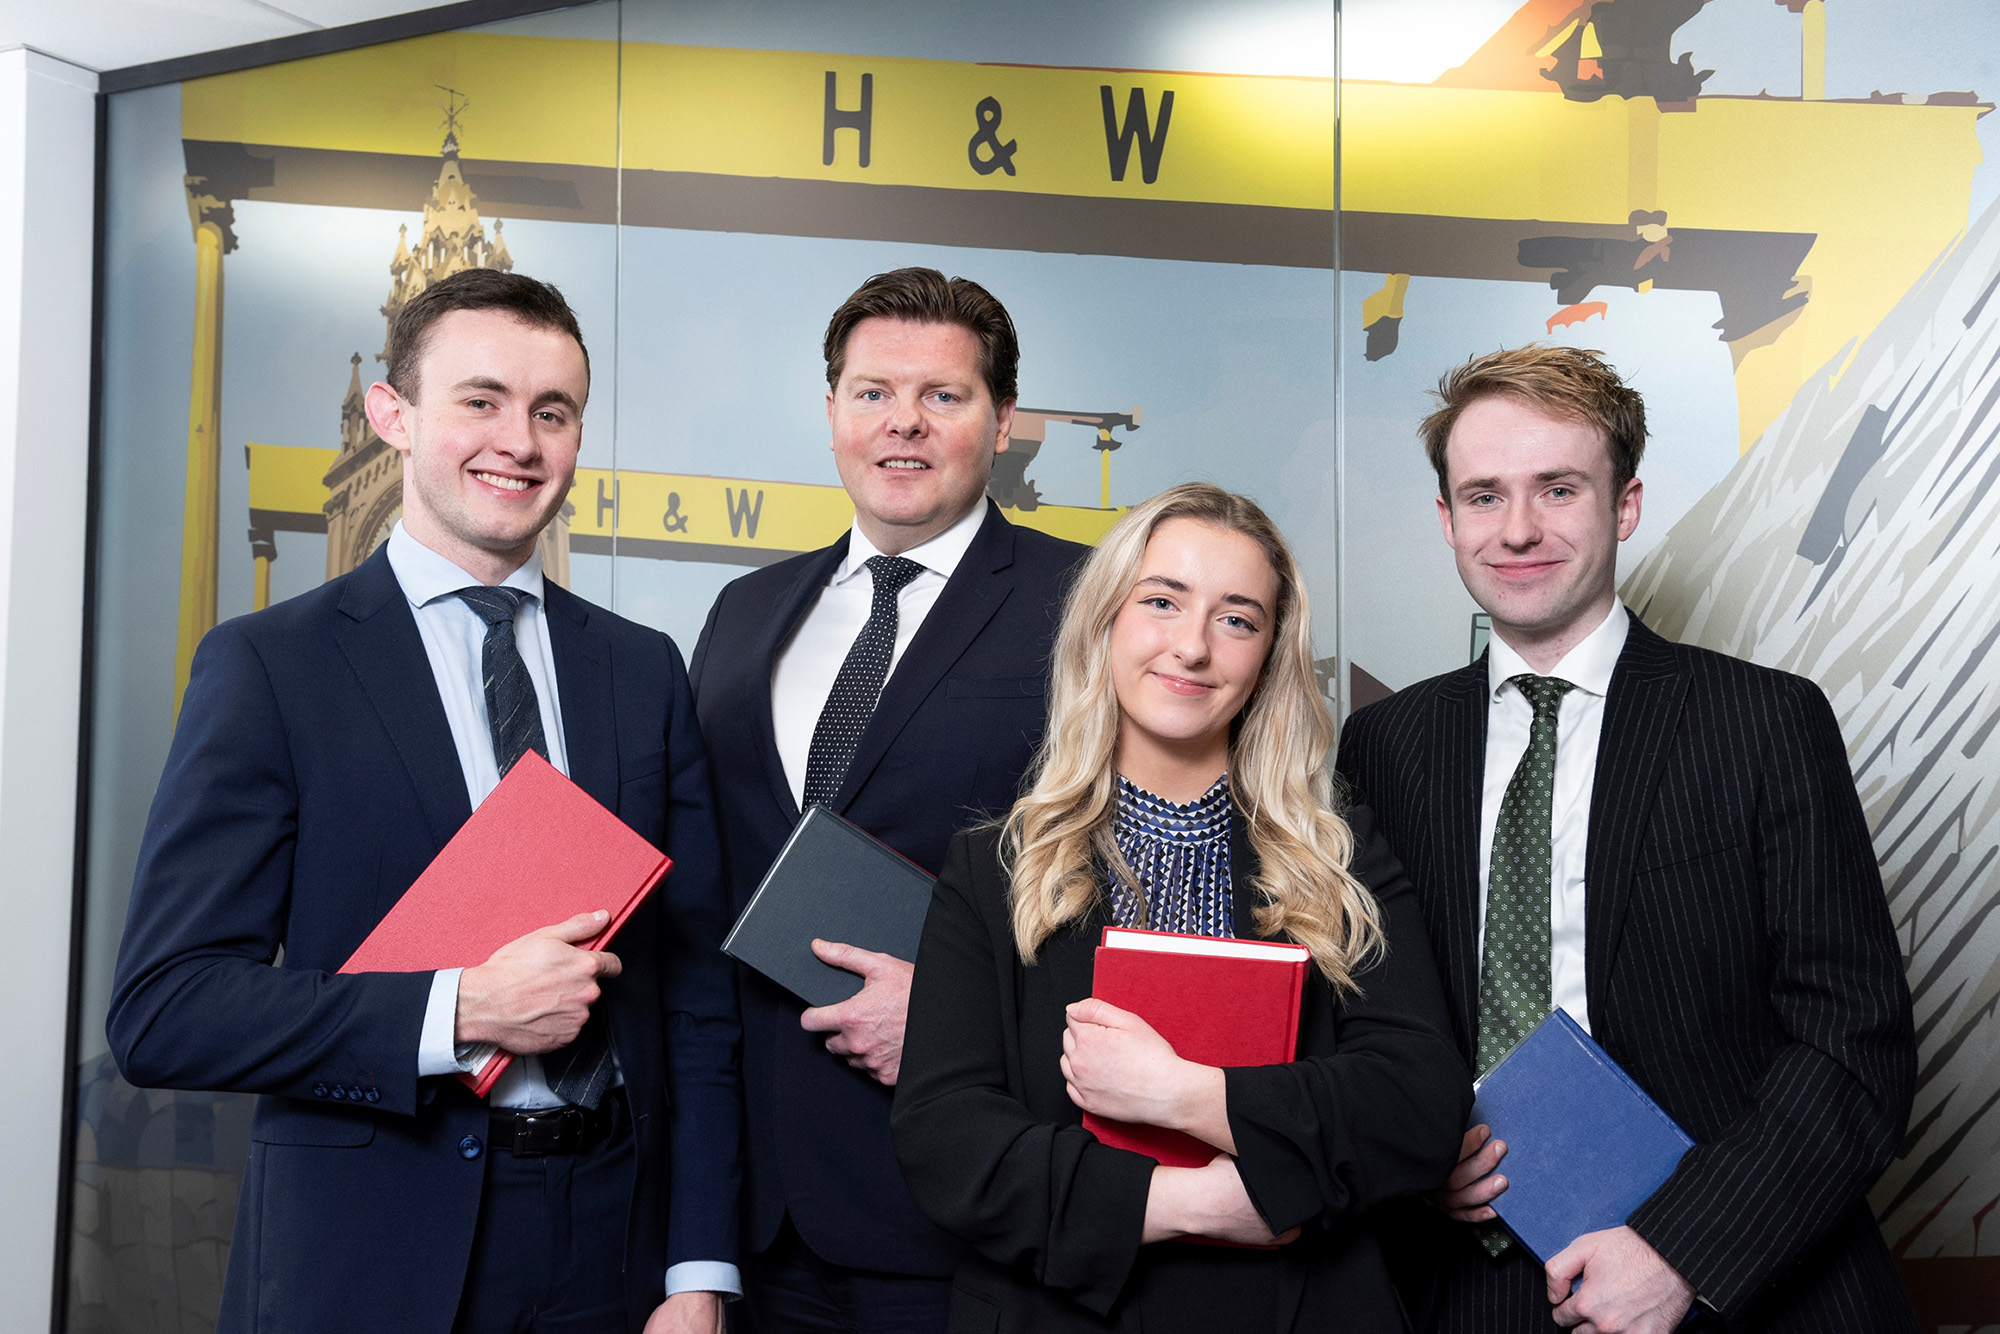 Belfast trainees to represent UK in environmental moot court competition